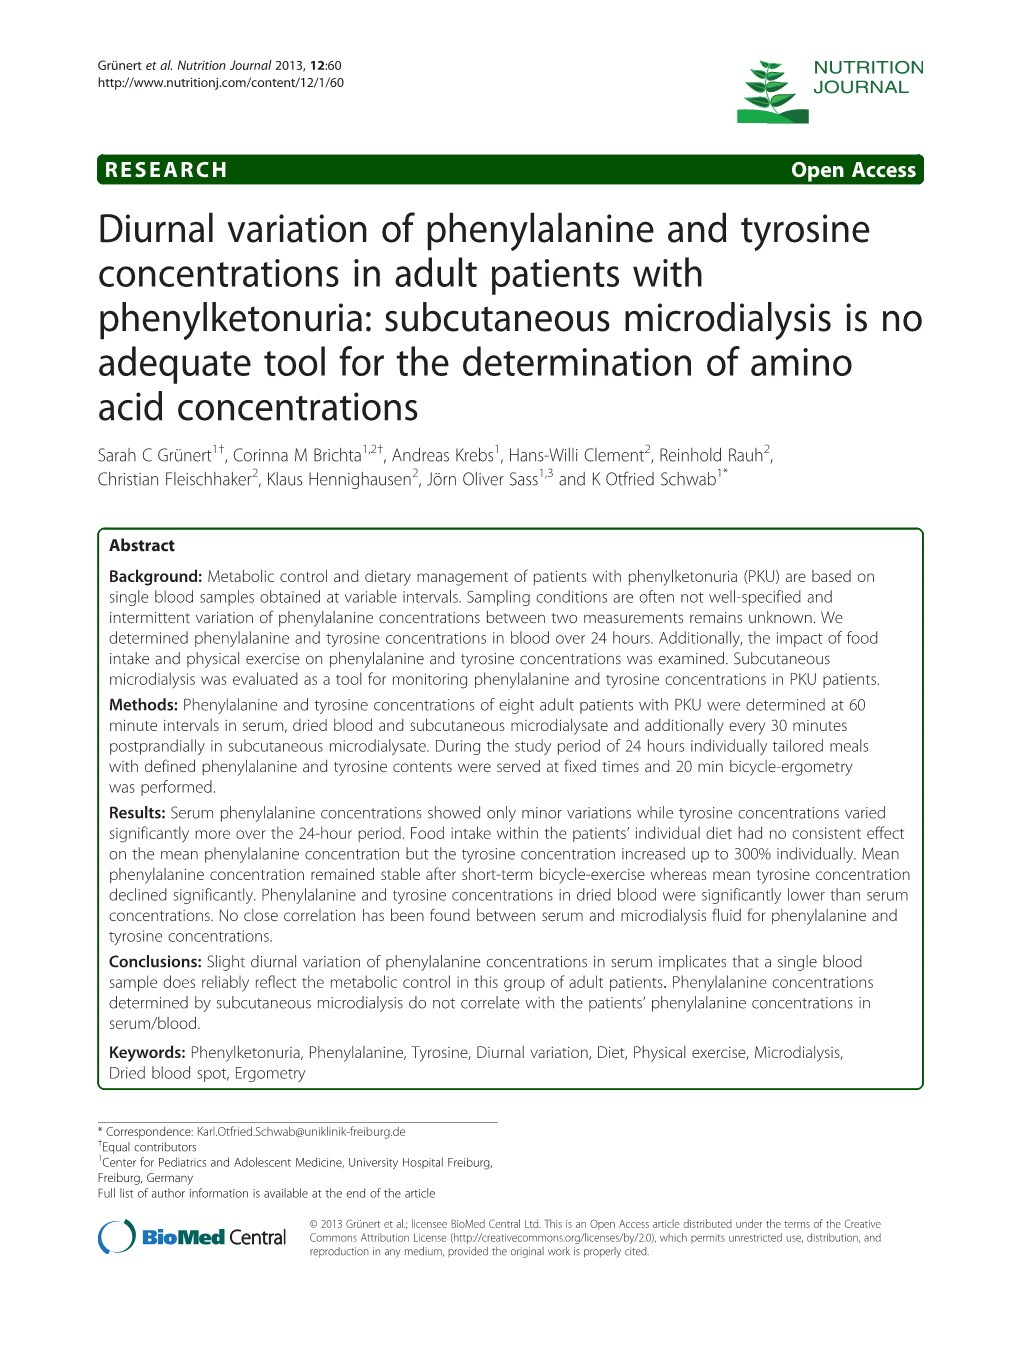 Diurnal Variation of Phenylalanine and Tyrosine Concentrations in Adult Patients with Phenylketonuria